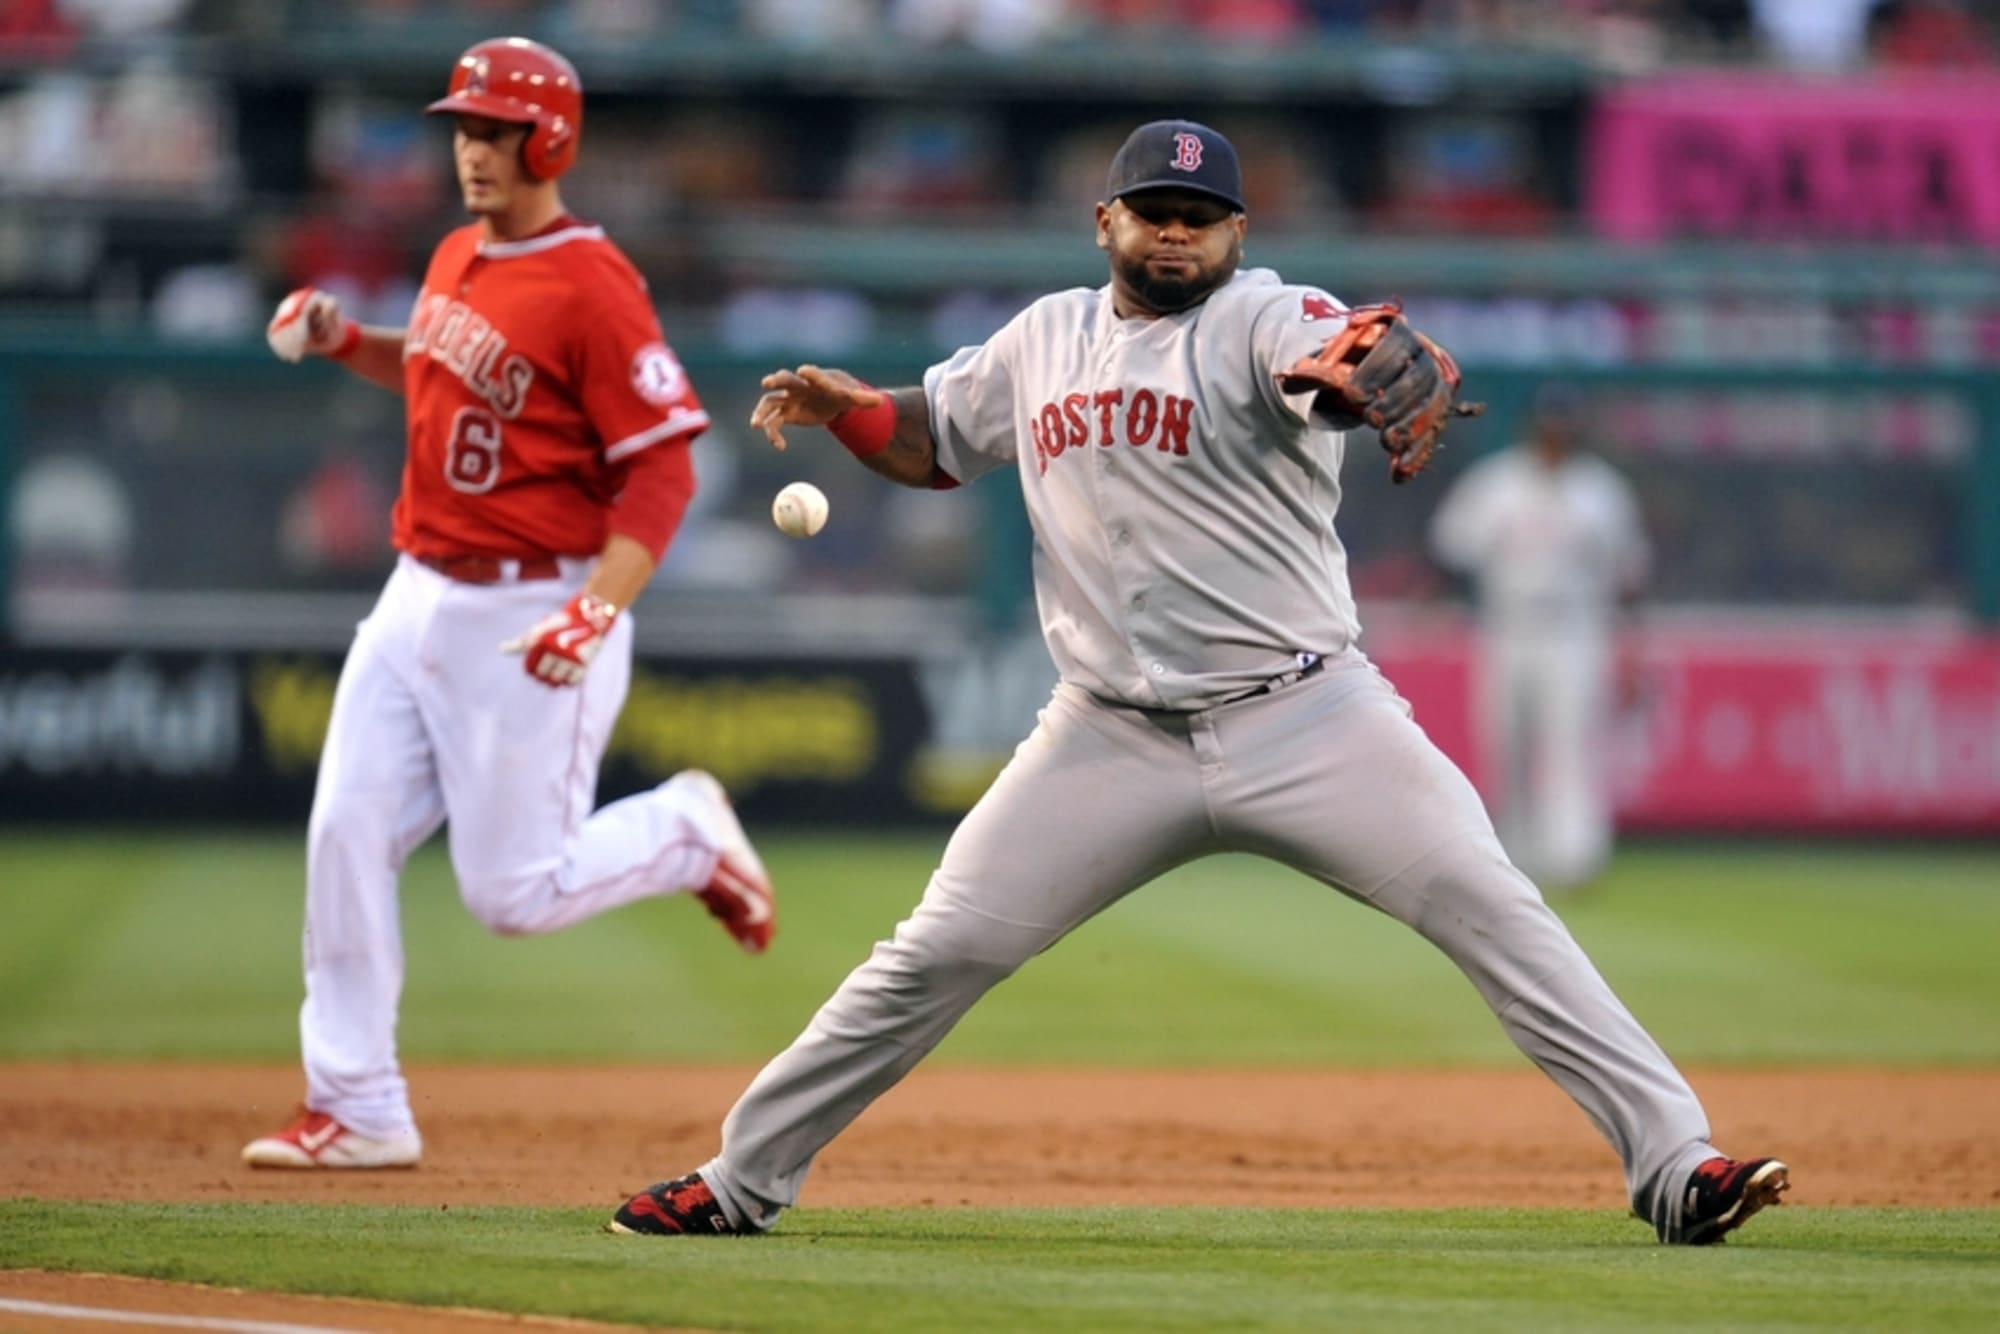 MLB Trade Rumors on X: Pablo Sandoval isn't ready to call it a